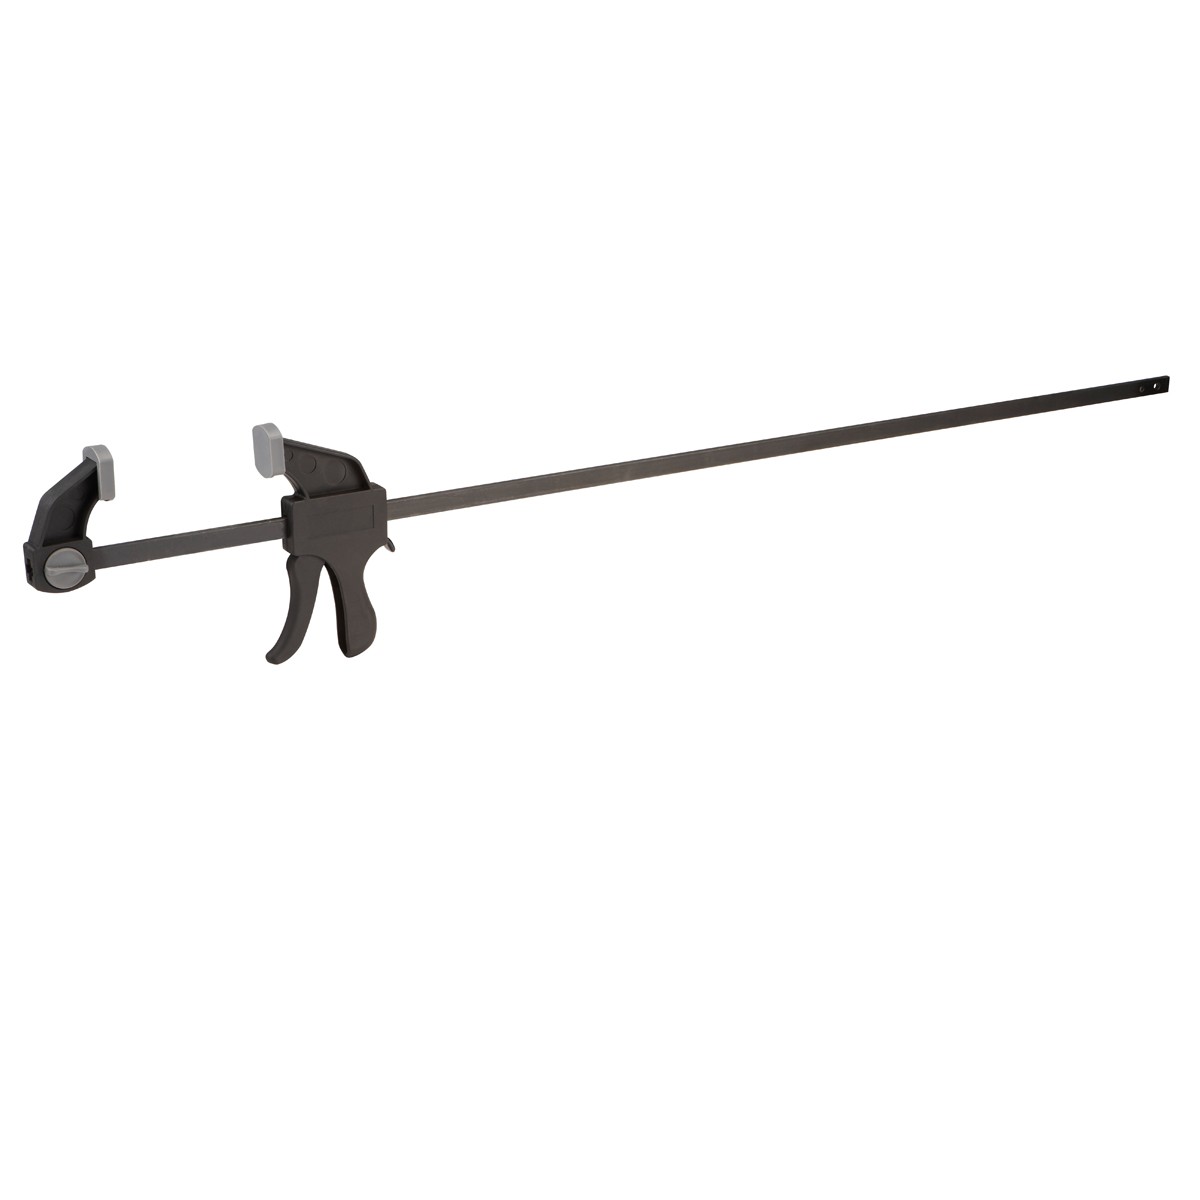 36 in. Ratcheting Bar Clamp/Spreader